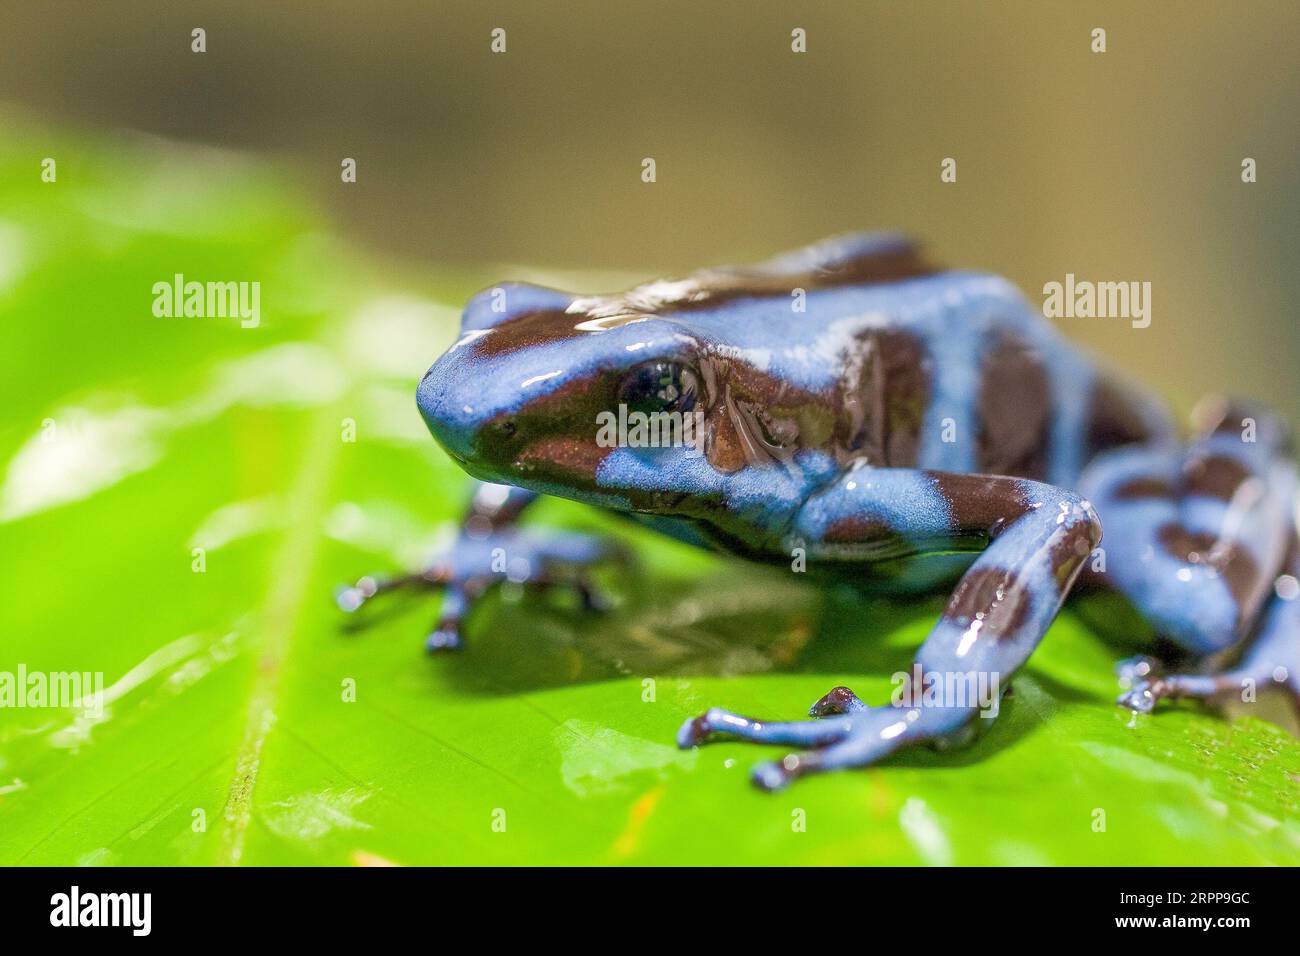 Panama, El Valle.  At the Centro de Conservacion de Anfibios de El Valle (EVACC), hundreds of amphibians are held after being evacuated from all over Stock Photo